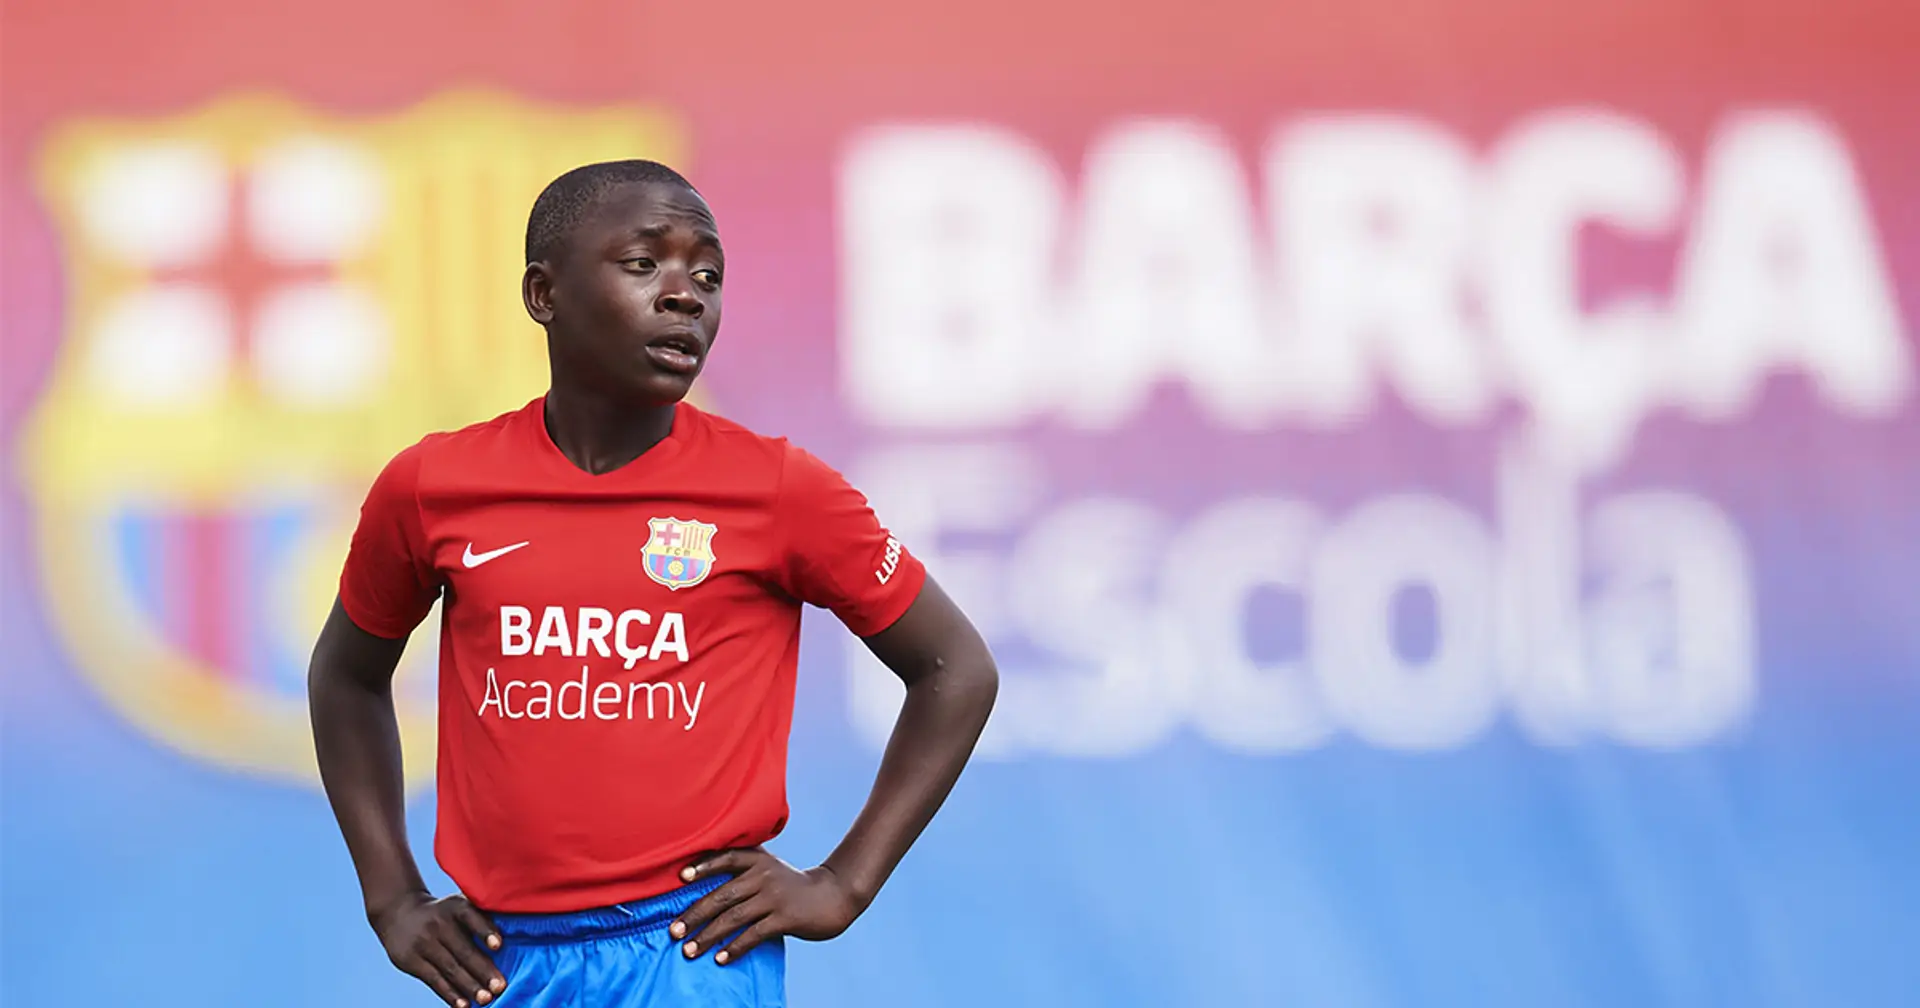 'Playing football in Africa is not always easy': Story about Zambia boy who lost his father and had his expenses covered by Barca coach